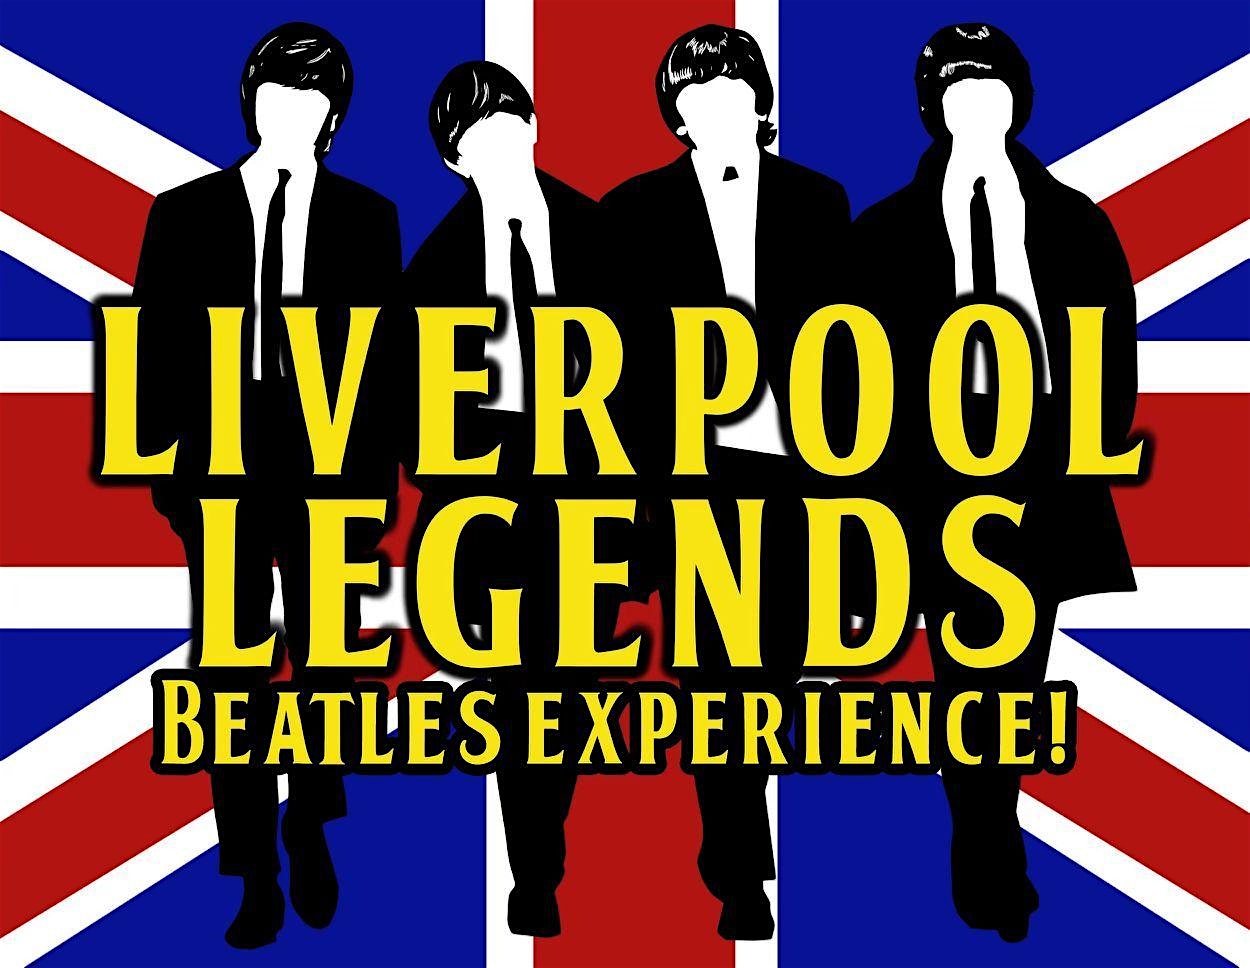 Liverpool Legends: “The Complete Beatles Experience!”